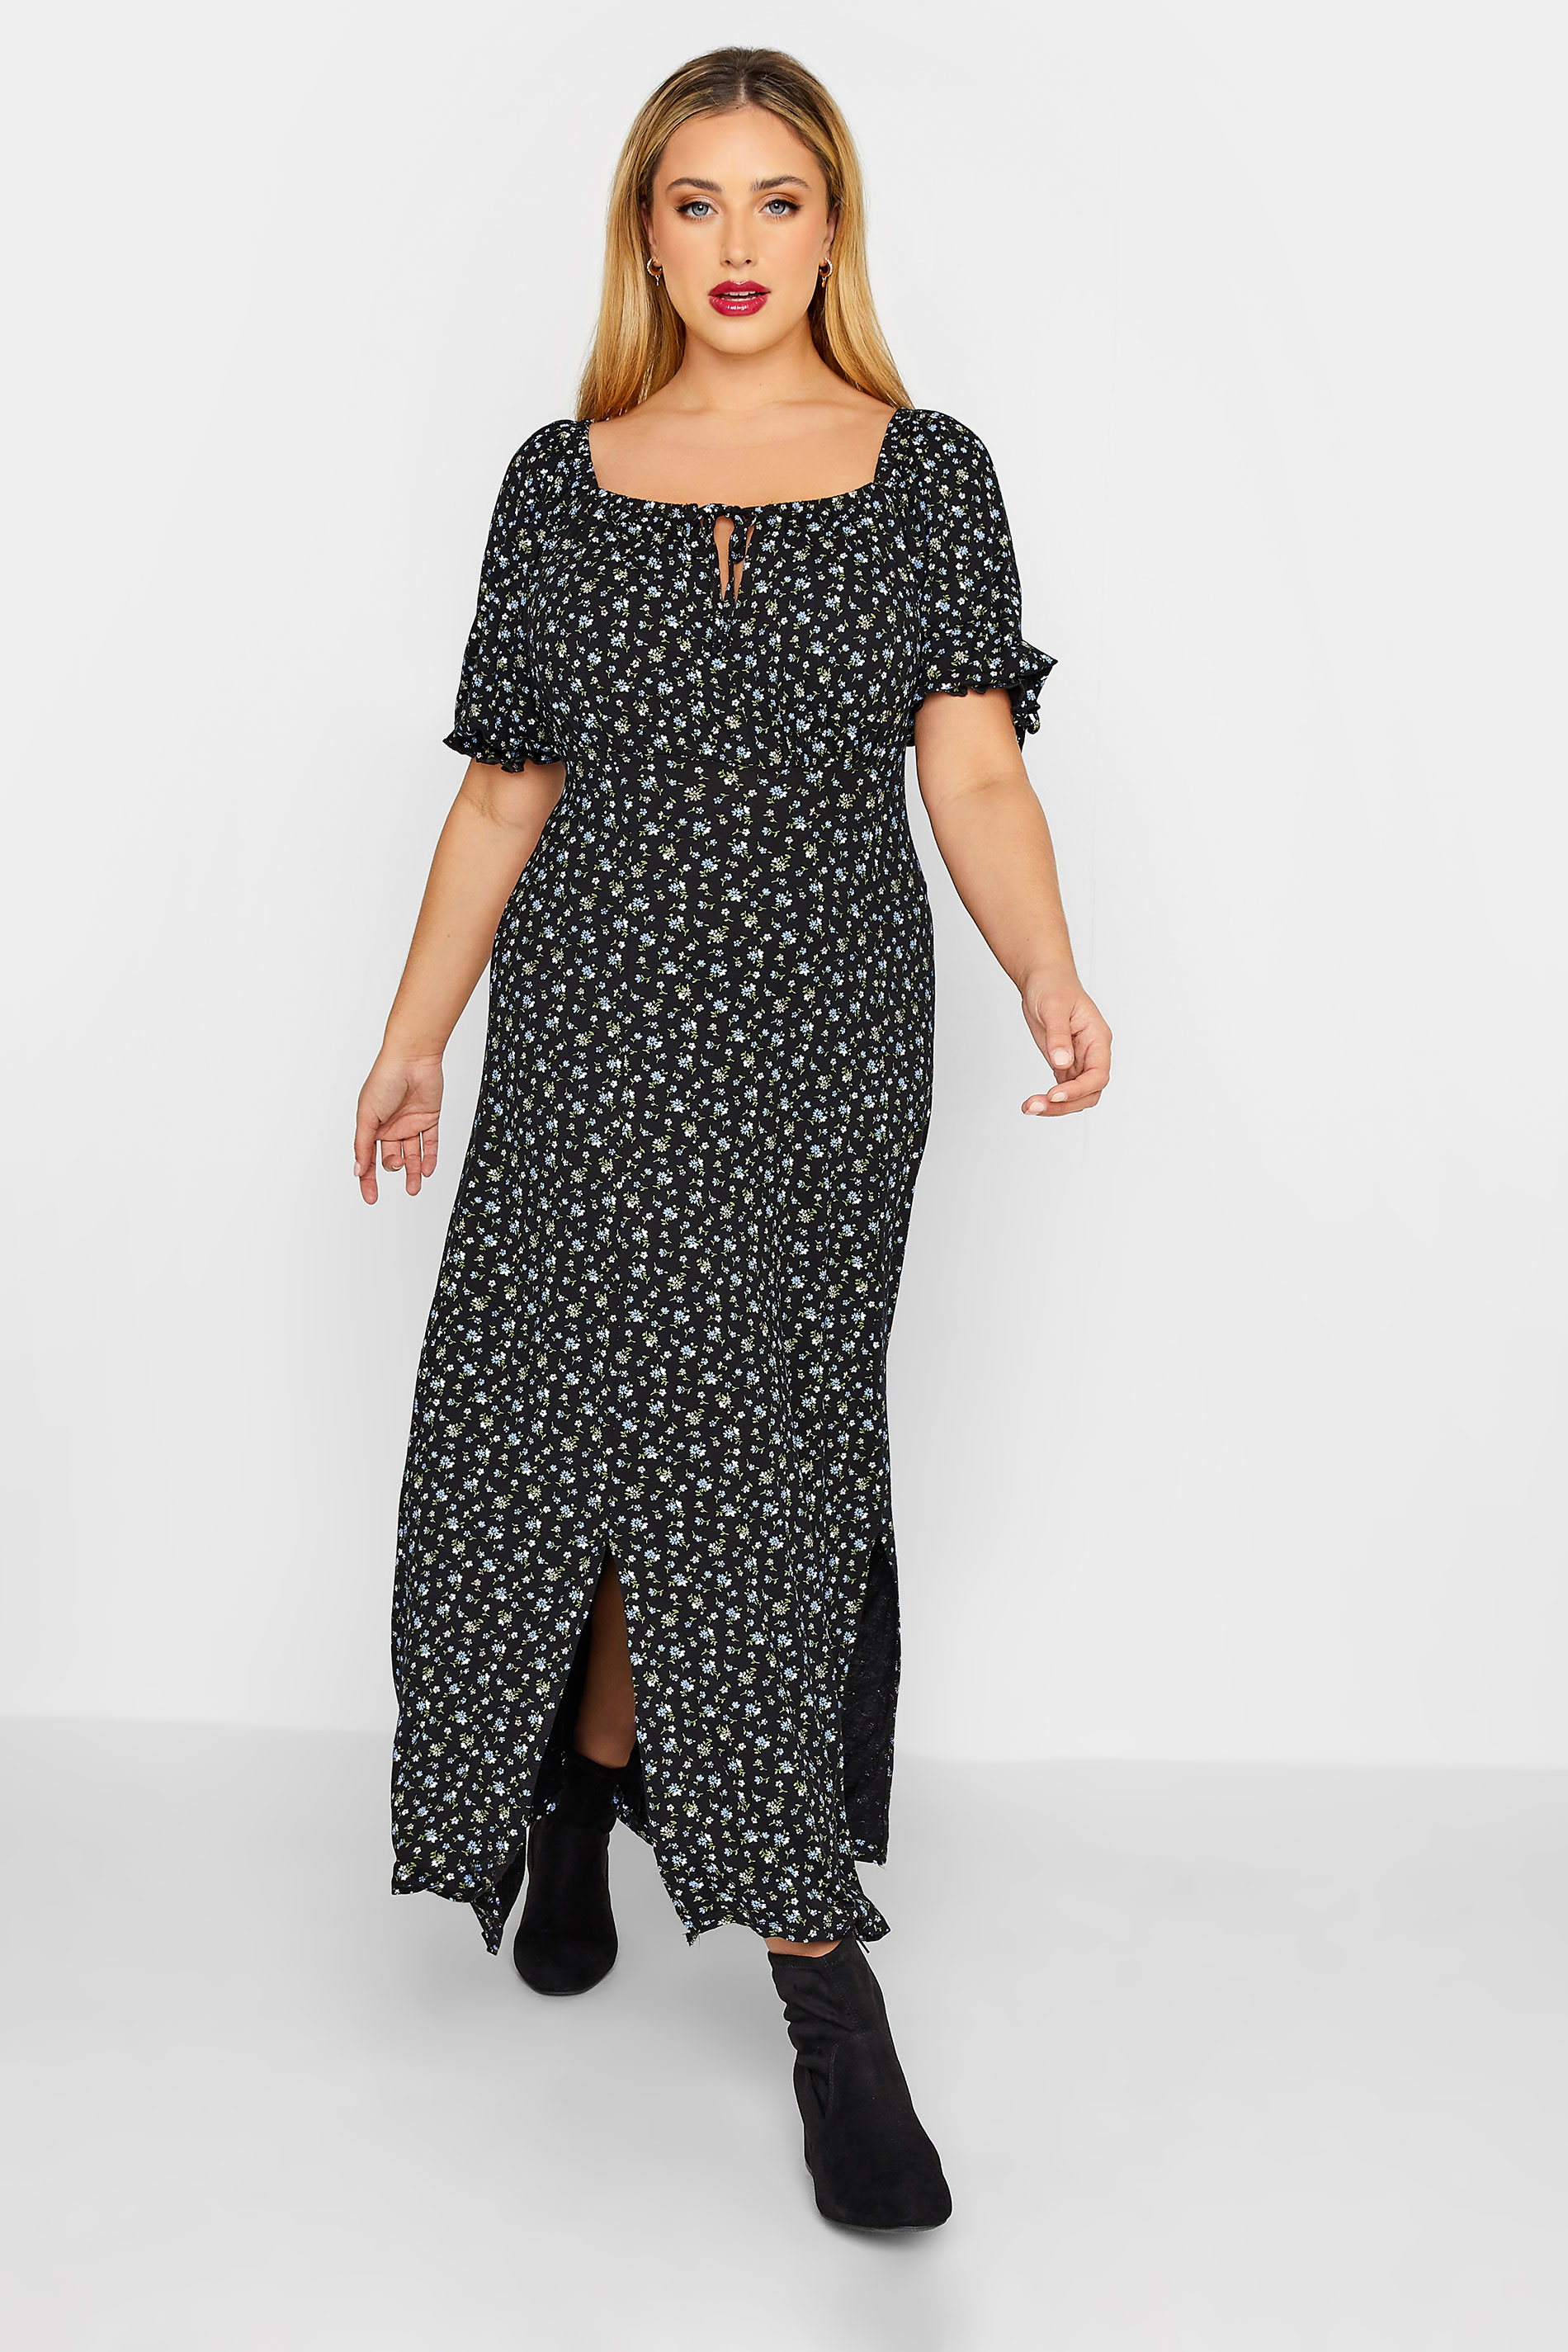 LIMITED COLLECTION Plus Size Black Floral Milkmaid Side Split Maxi Dress | Yours Clothing  1